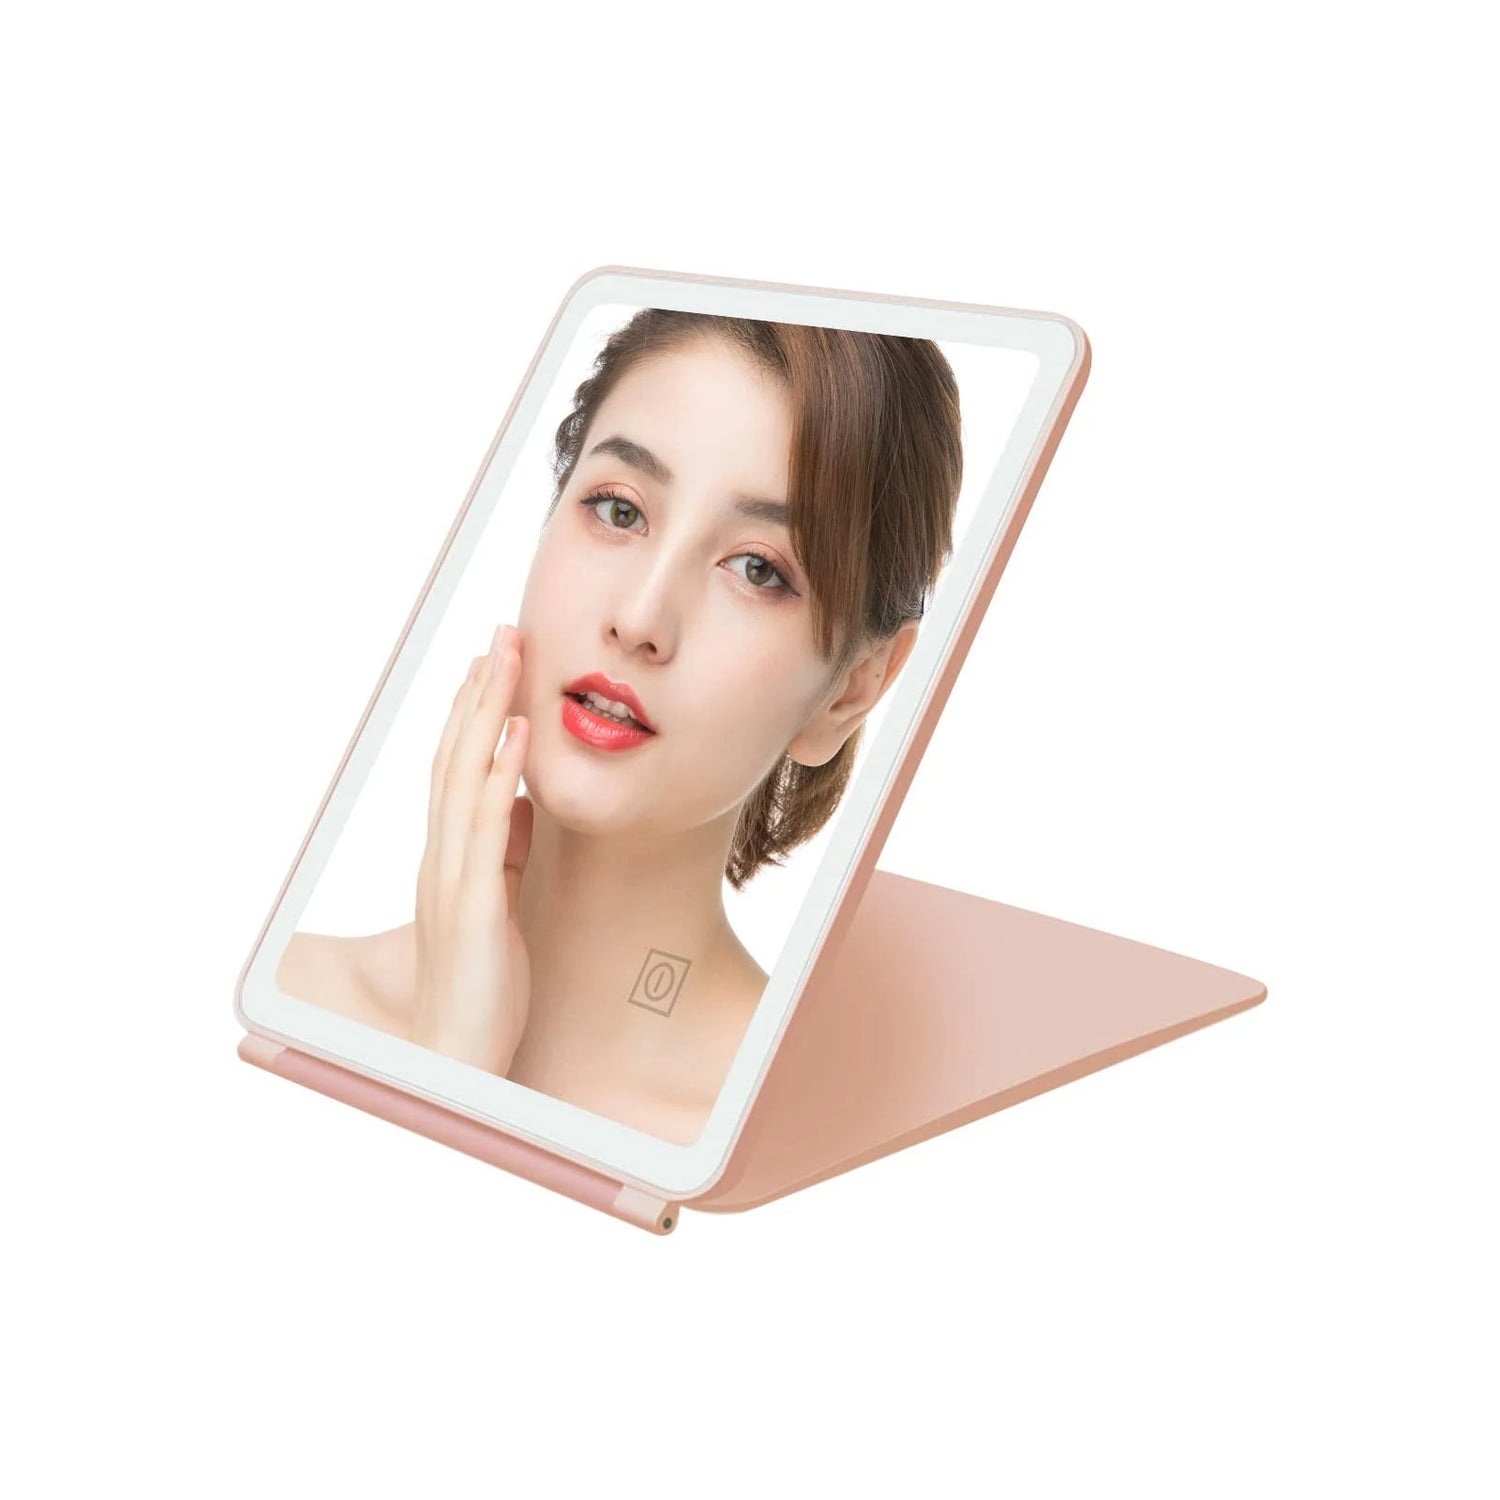 COSMETIC MAKEUP MIRROR - HAND HELD FOLDABLE